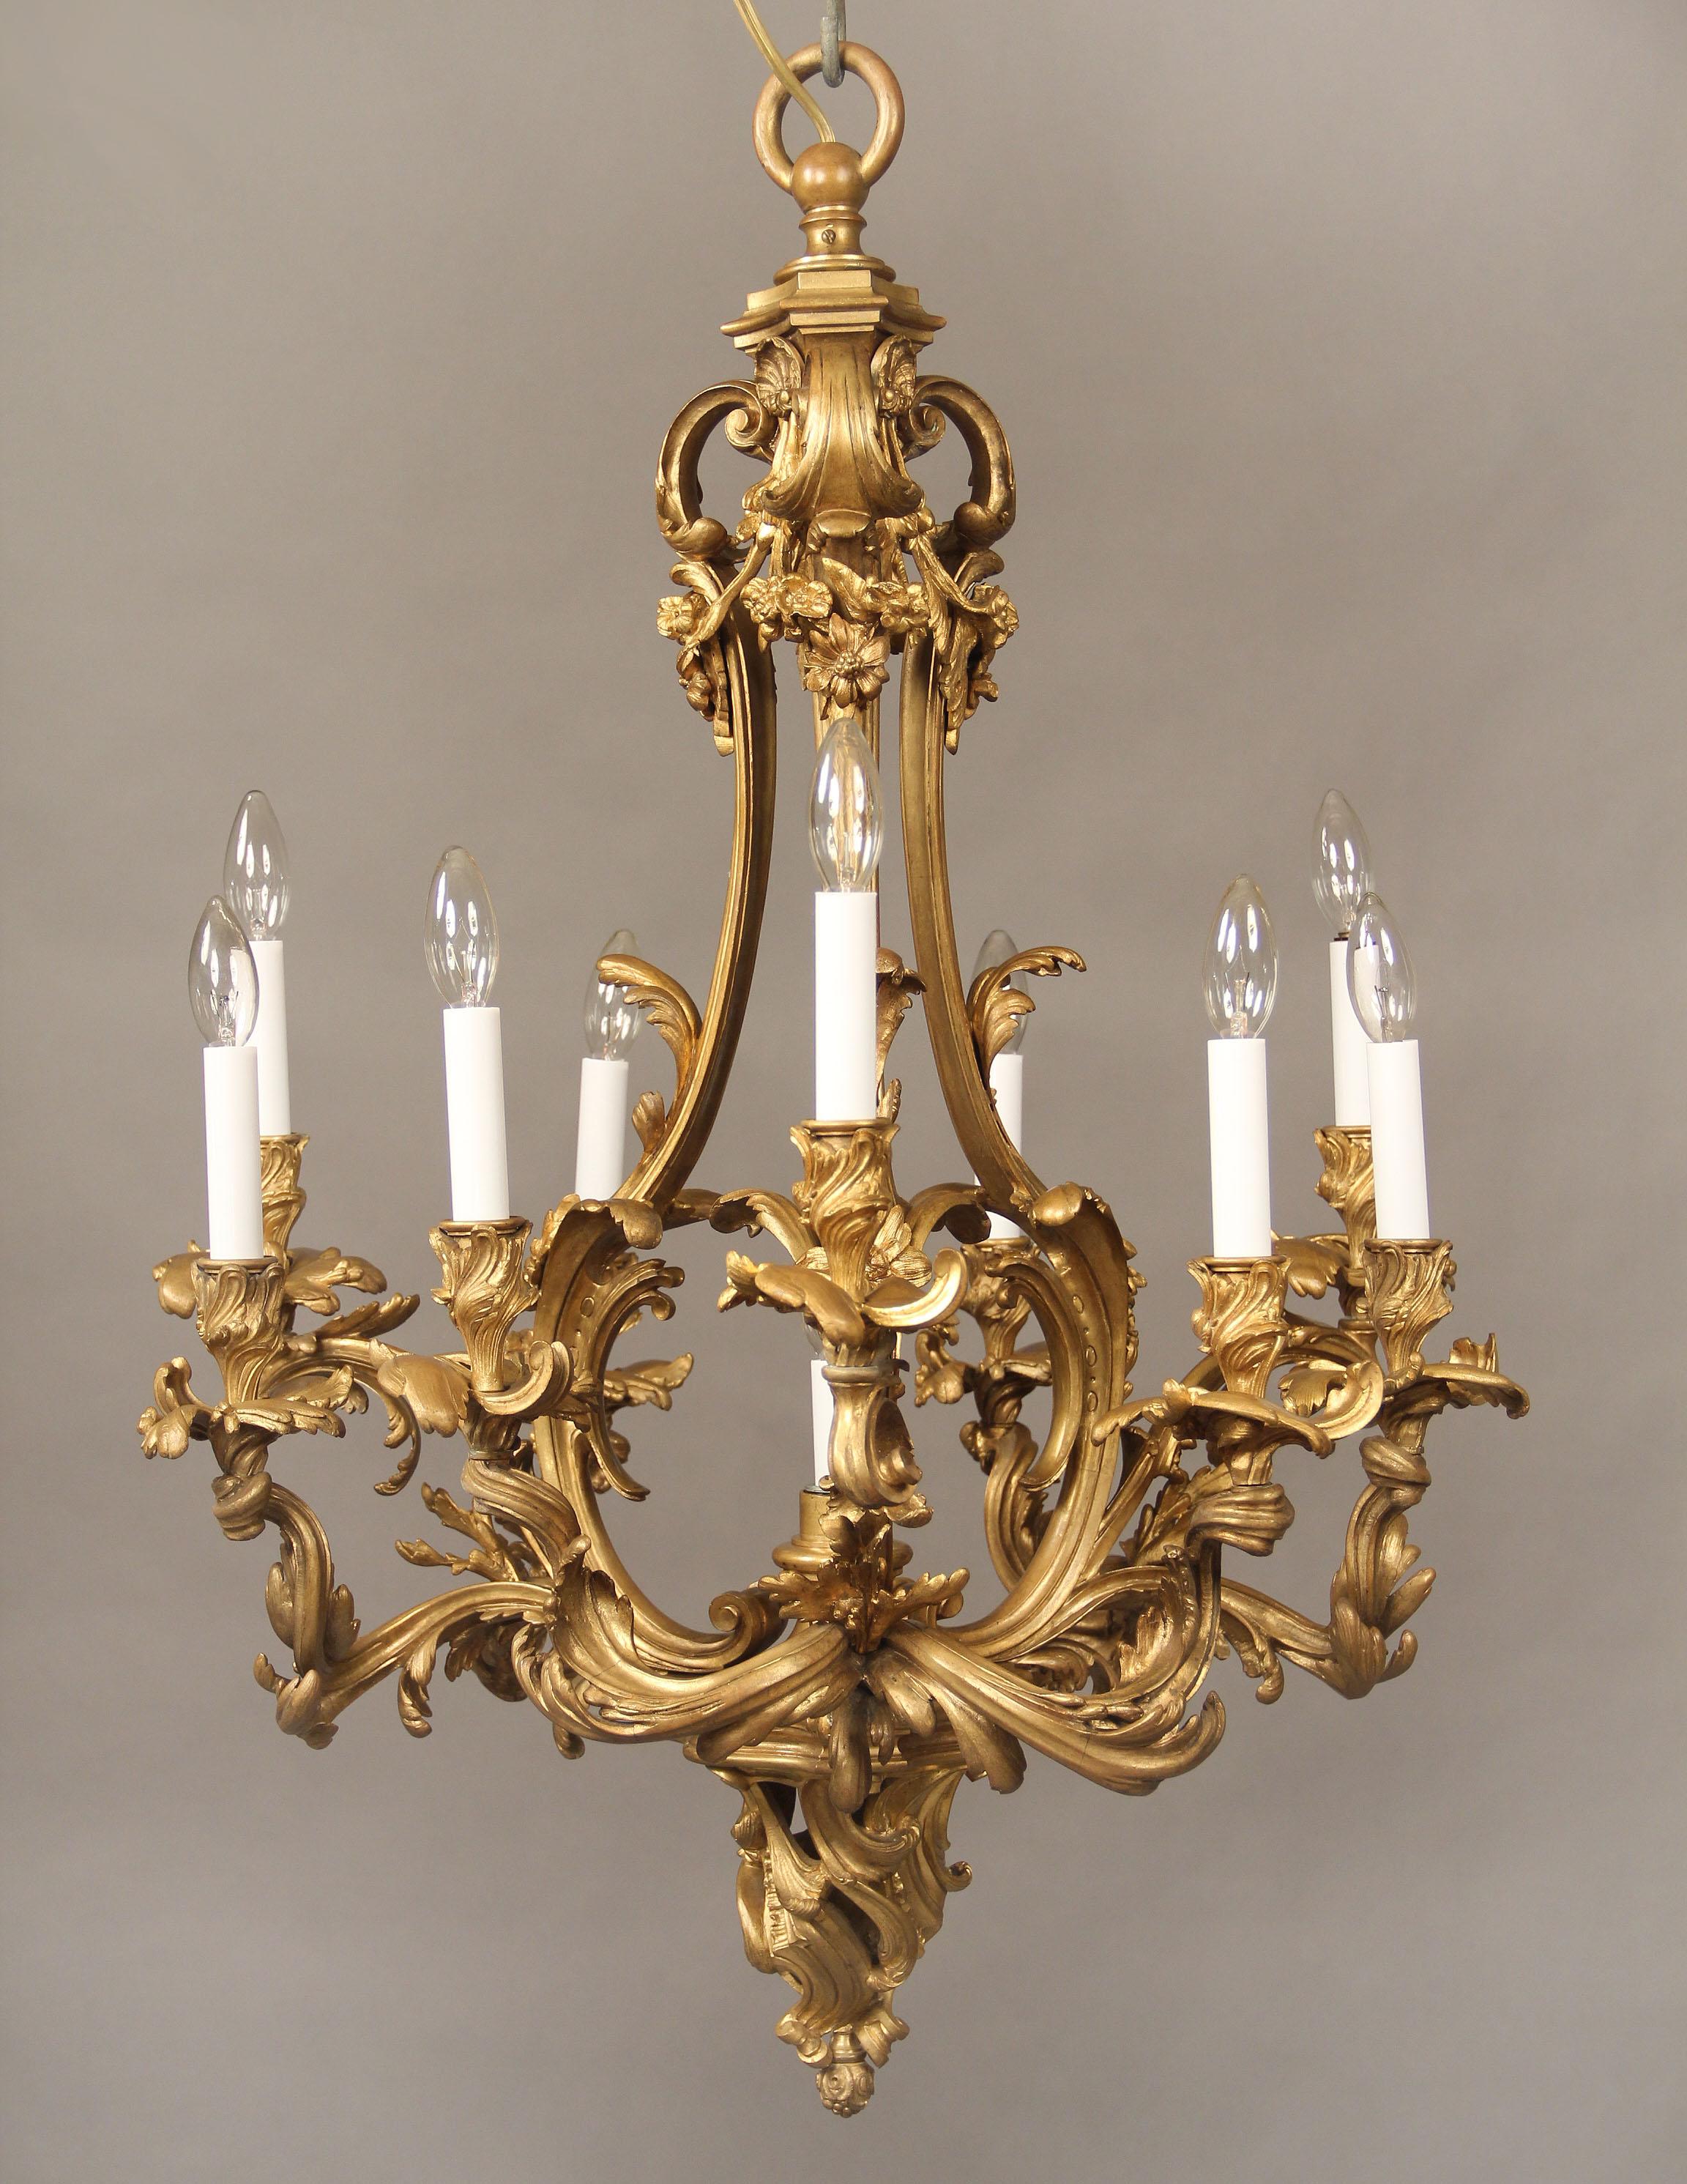 A nice quality late 19th century gilt bronze ten-light chandelier

Bronze casted frame with flowers and foliate spiraled arms. One center interior and nine-tiered perimeter lights.